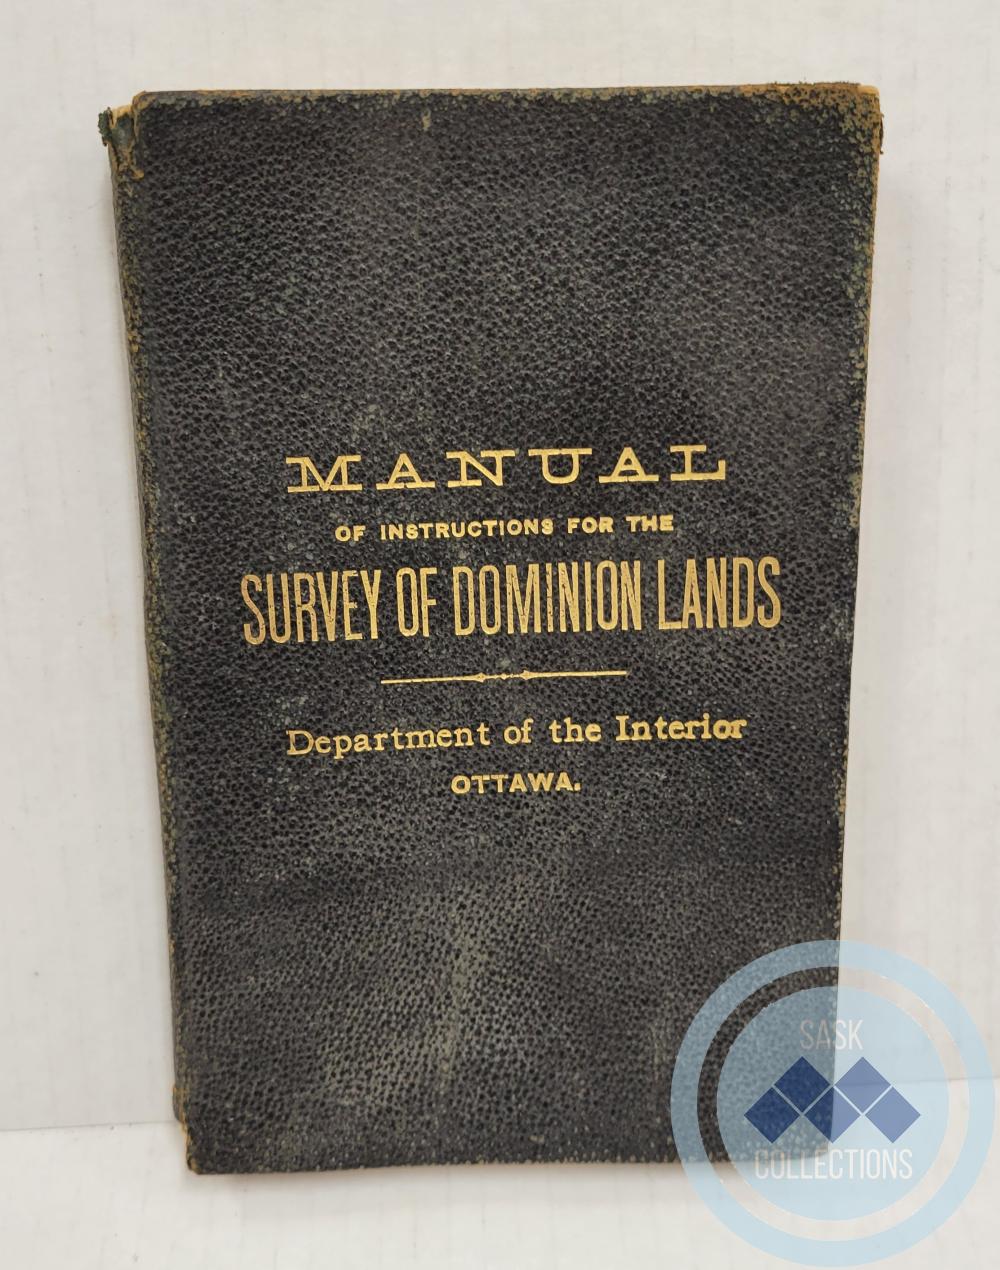 Manual of Instructions for the Survey of Dominion Lands - Department of the Interior, Ottawa